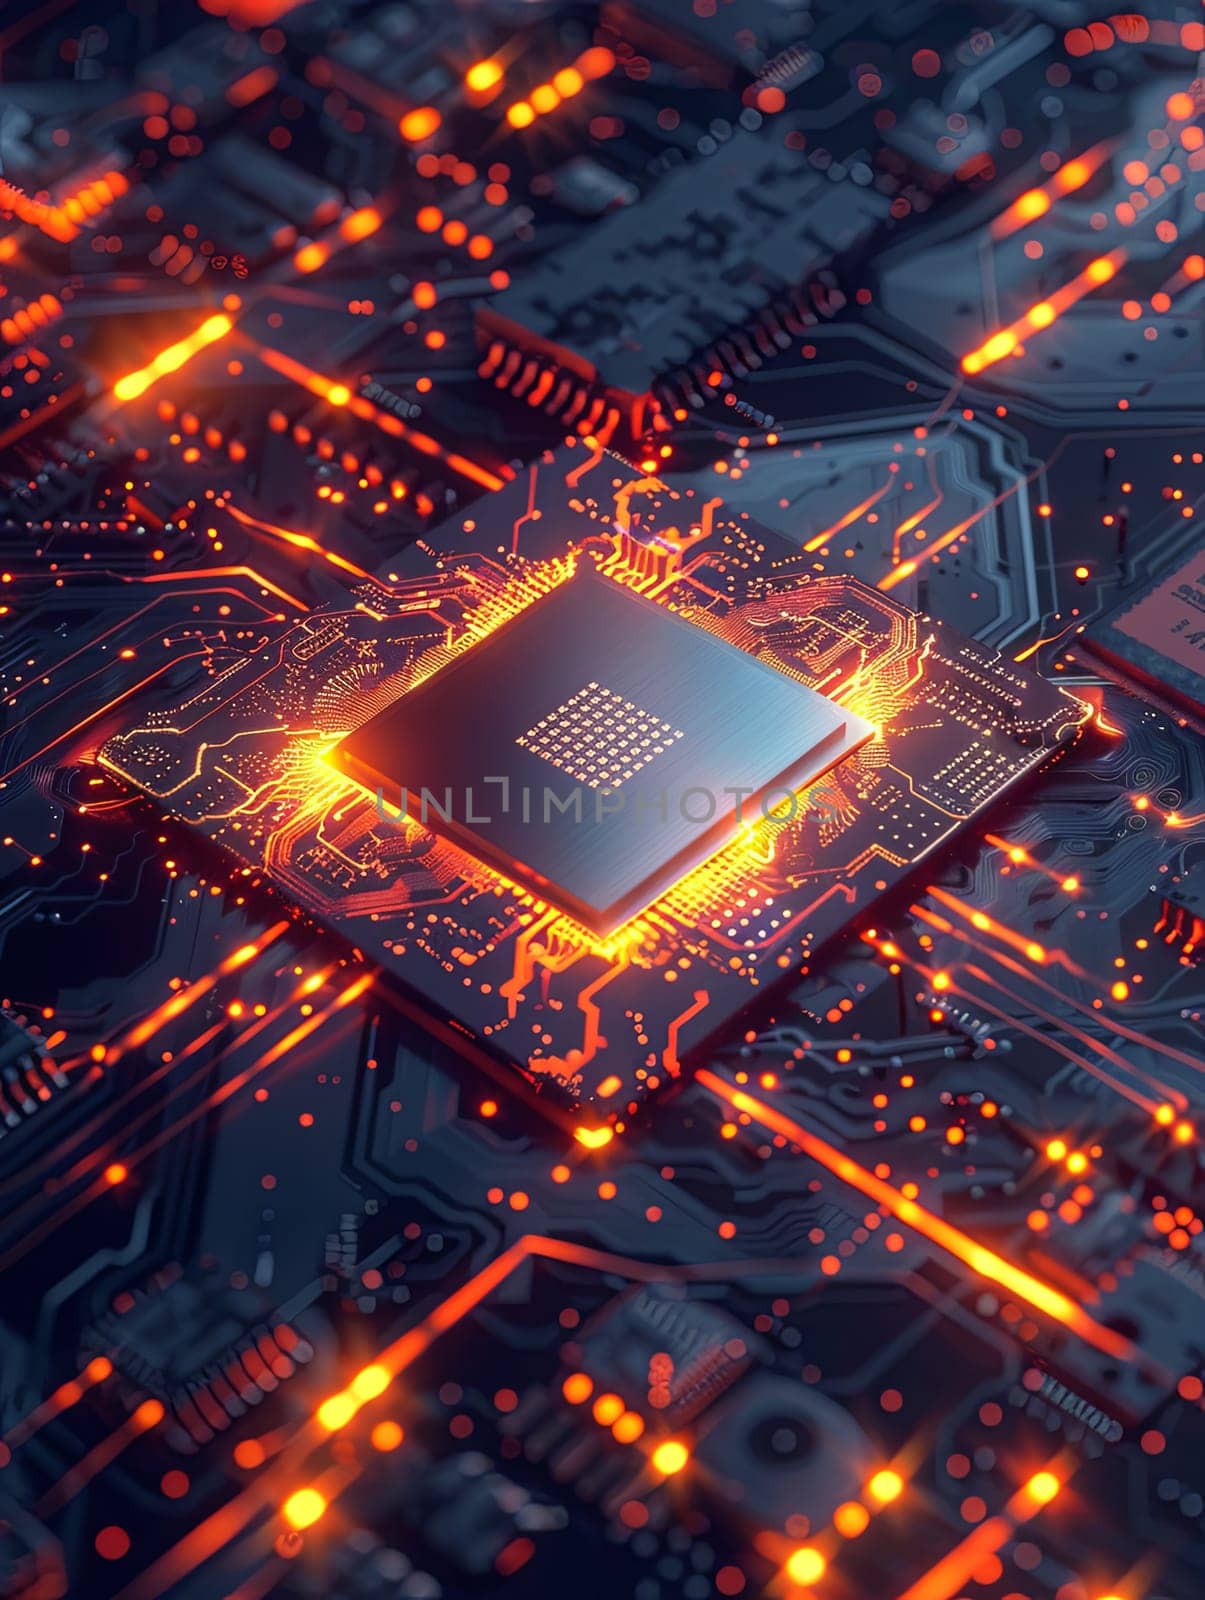 An ultra-modern microprocessor or chip on a motherboard, surrounded by intricate digital data streams and glowing light effects, symbolizing the processing power of AI.